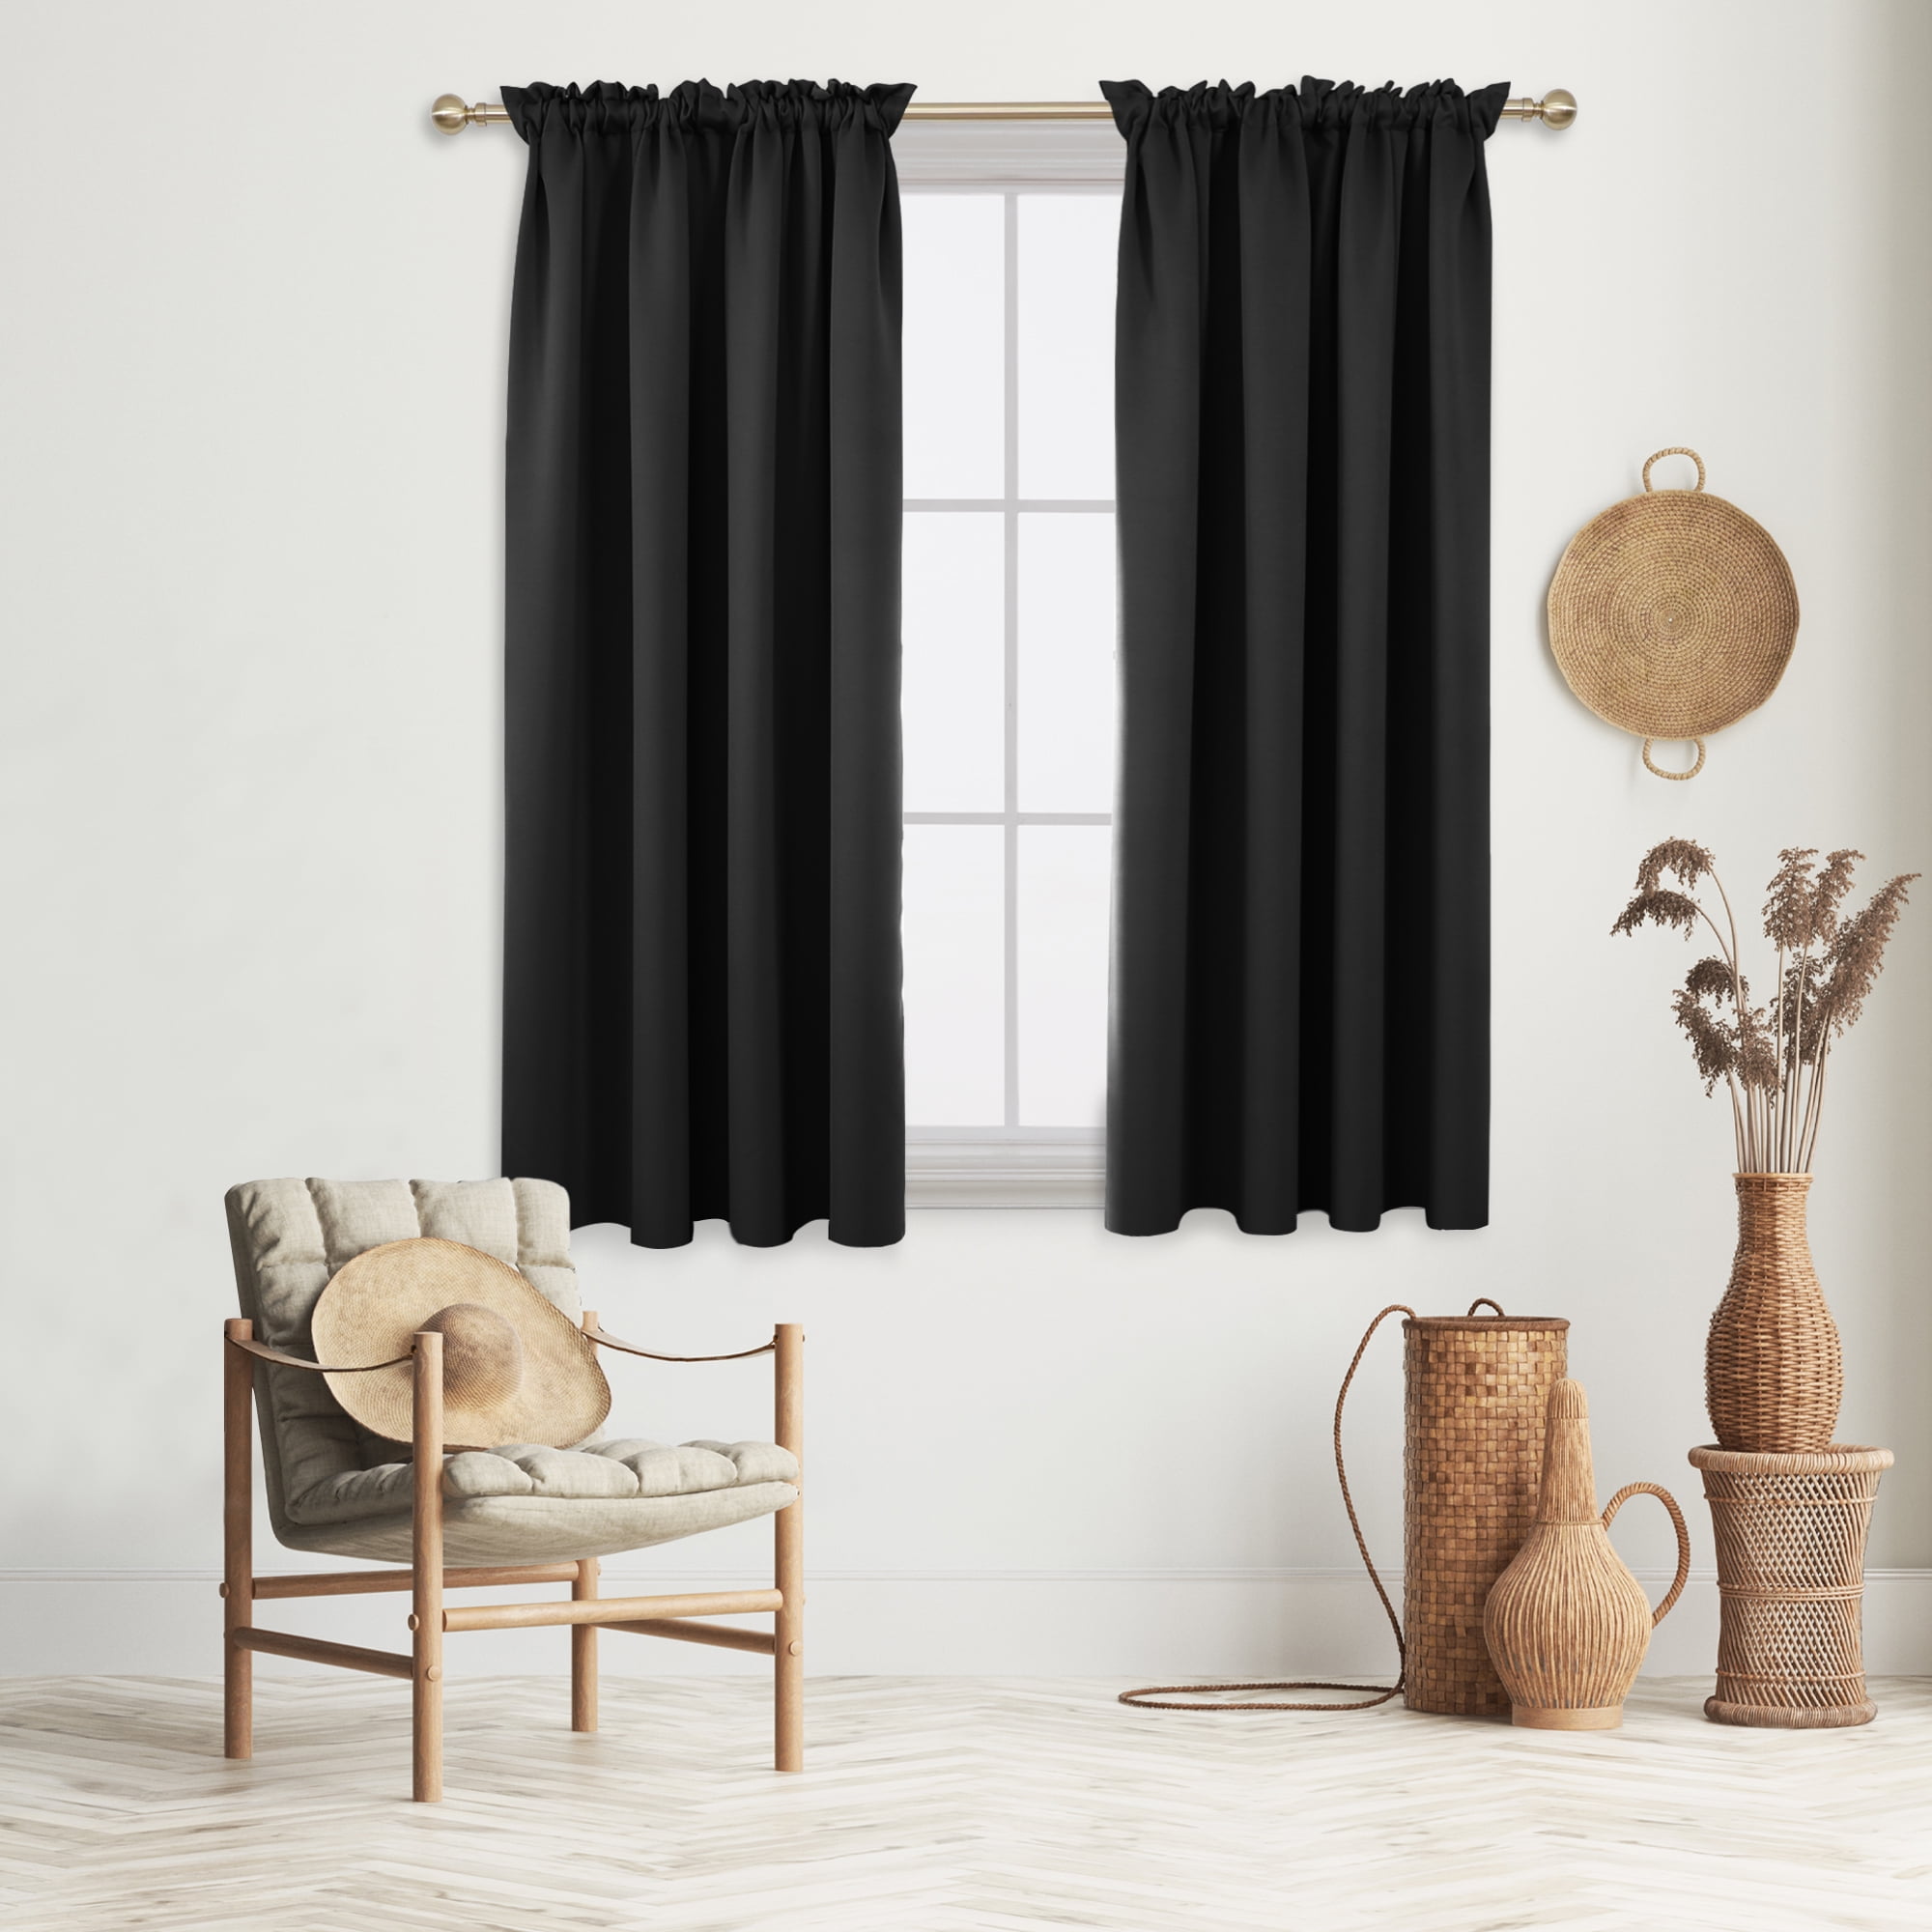 Navy Blue Boho Kitchen Curtain,African Mud,Window Valance,Blackout,Sheer,Decorative,Home Decor,Caffe Curtain,Custom Size,Made to order